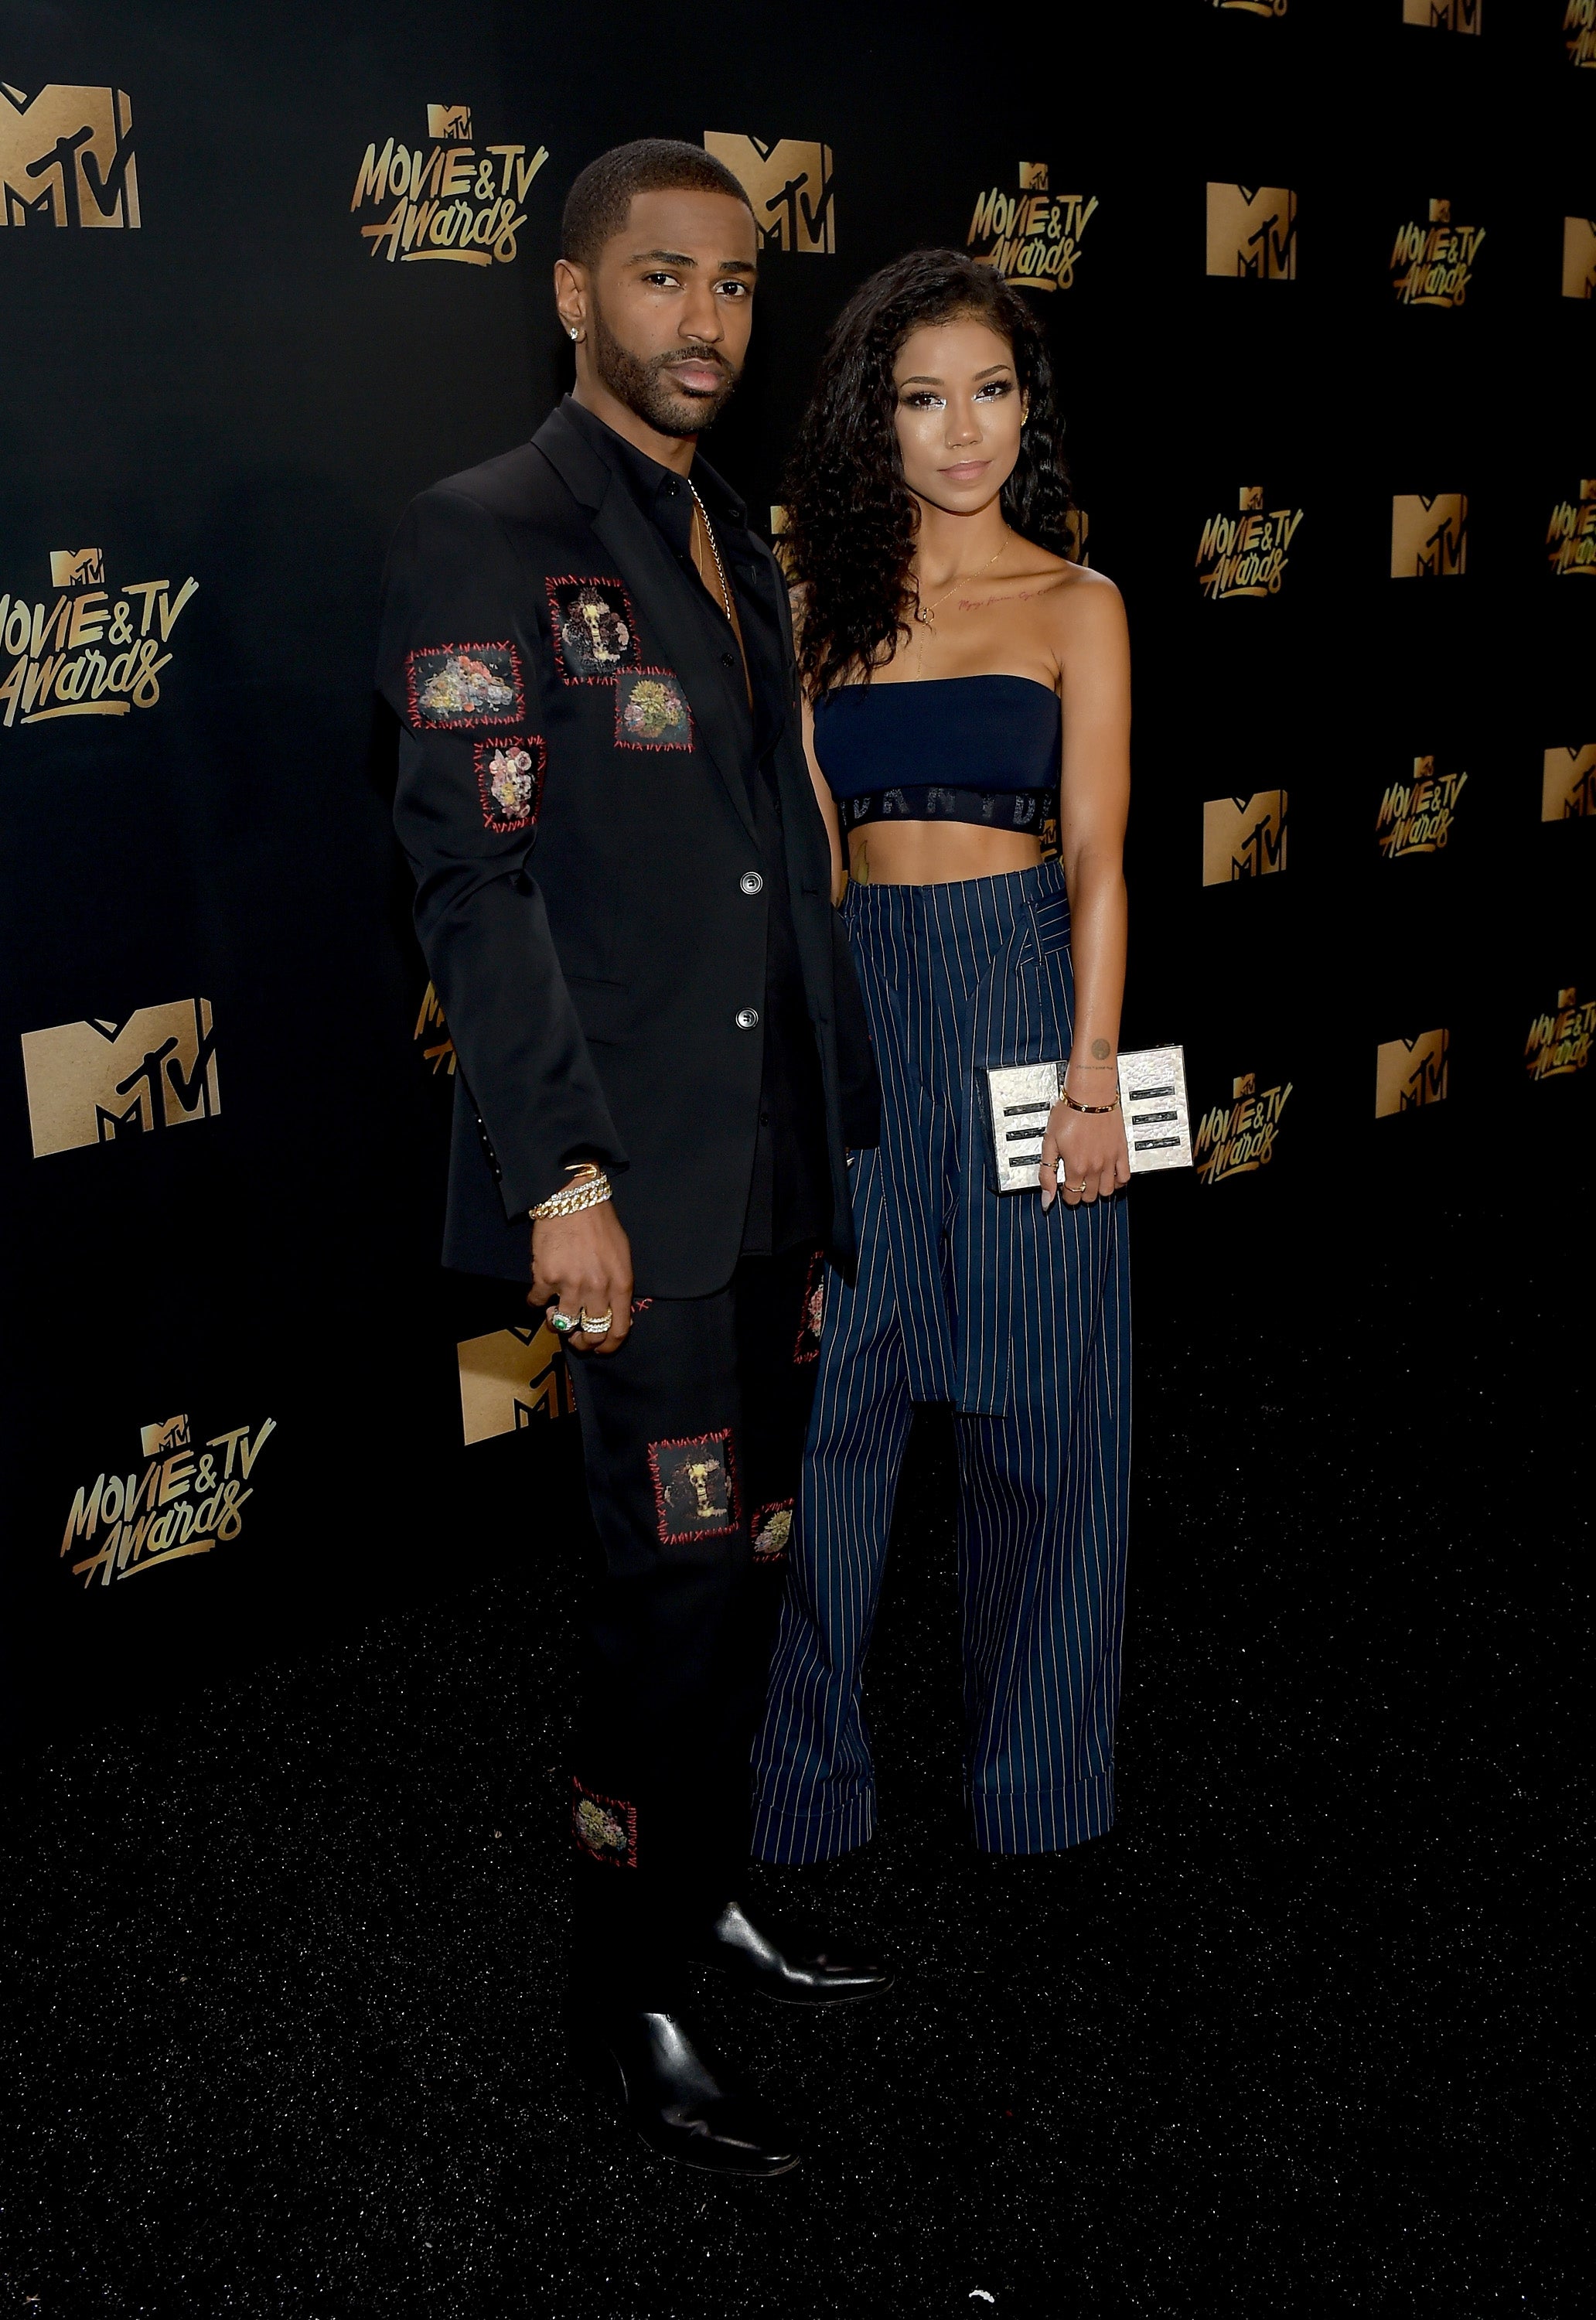 The 2017 MTV Movie Awards Red Carpet Was Lit!
